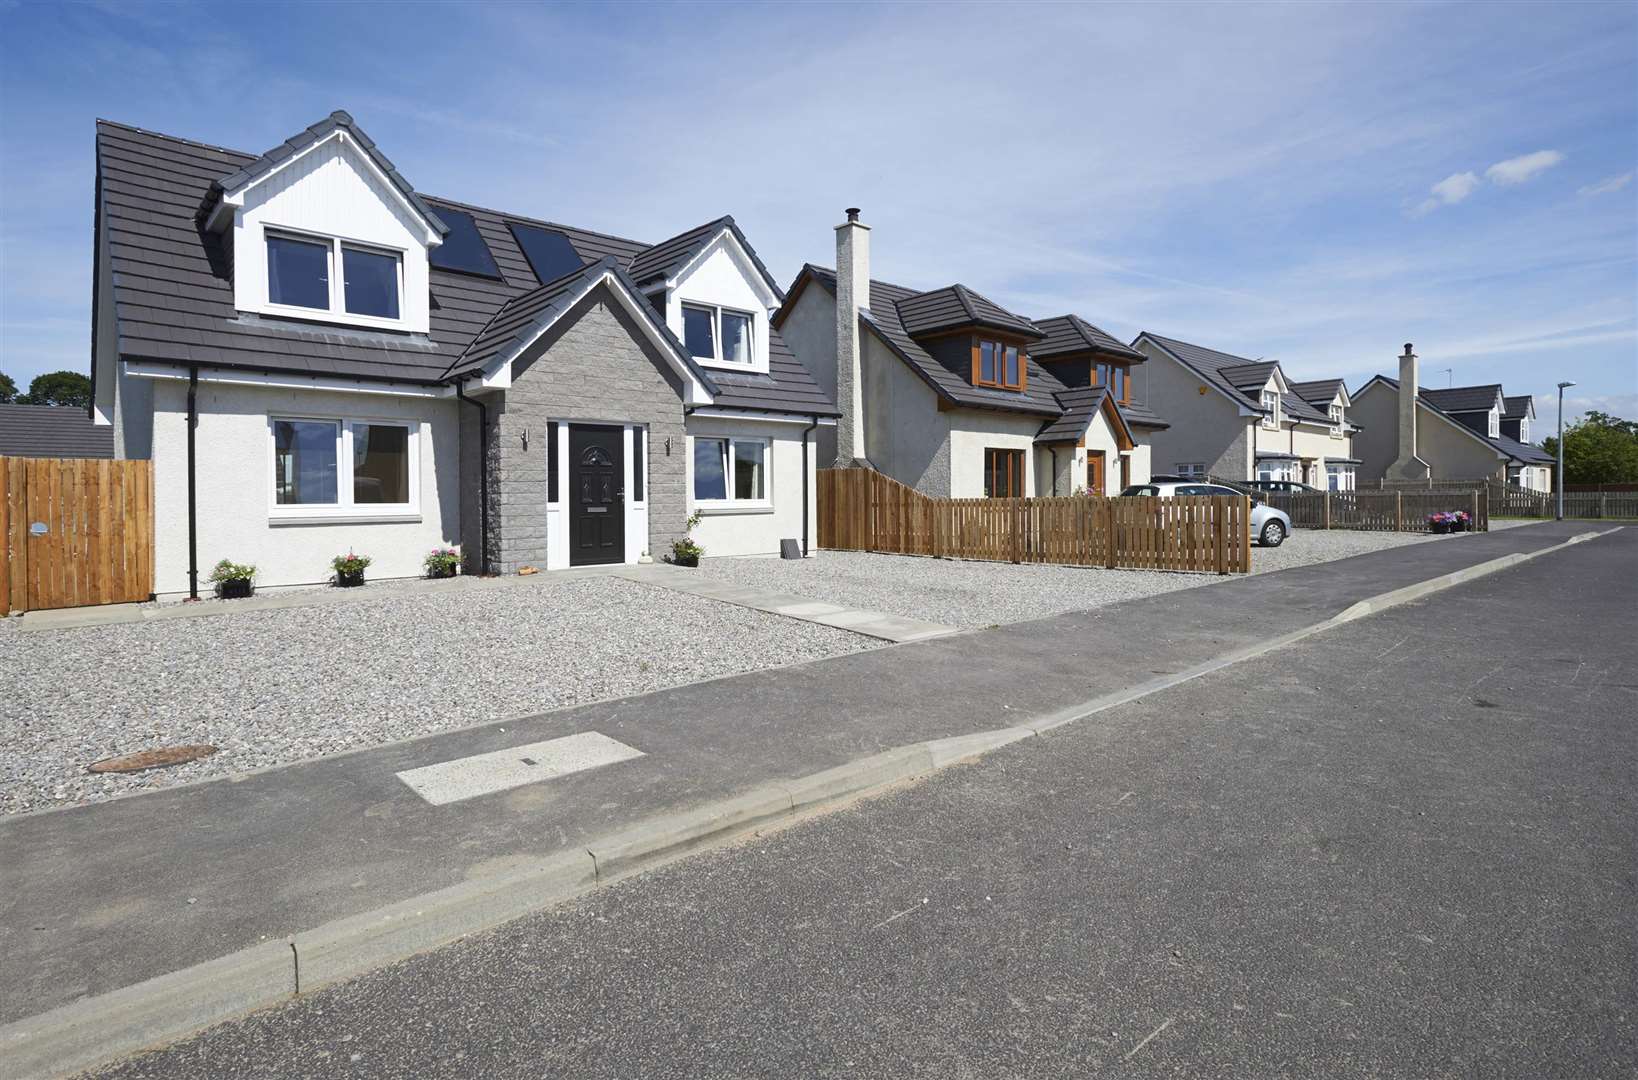 Communities Housing Trust aims to revitalise communities in the Highlands and beyond.